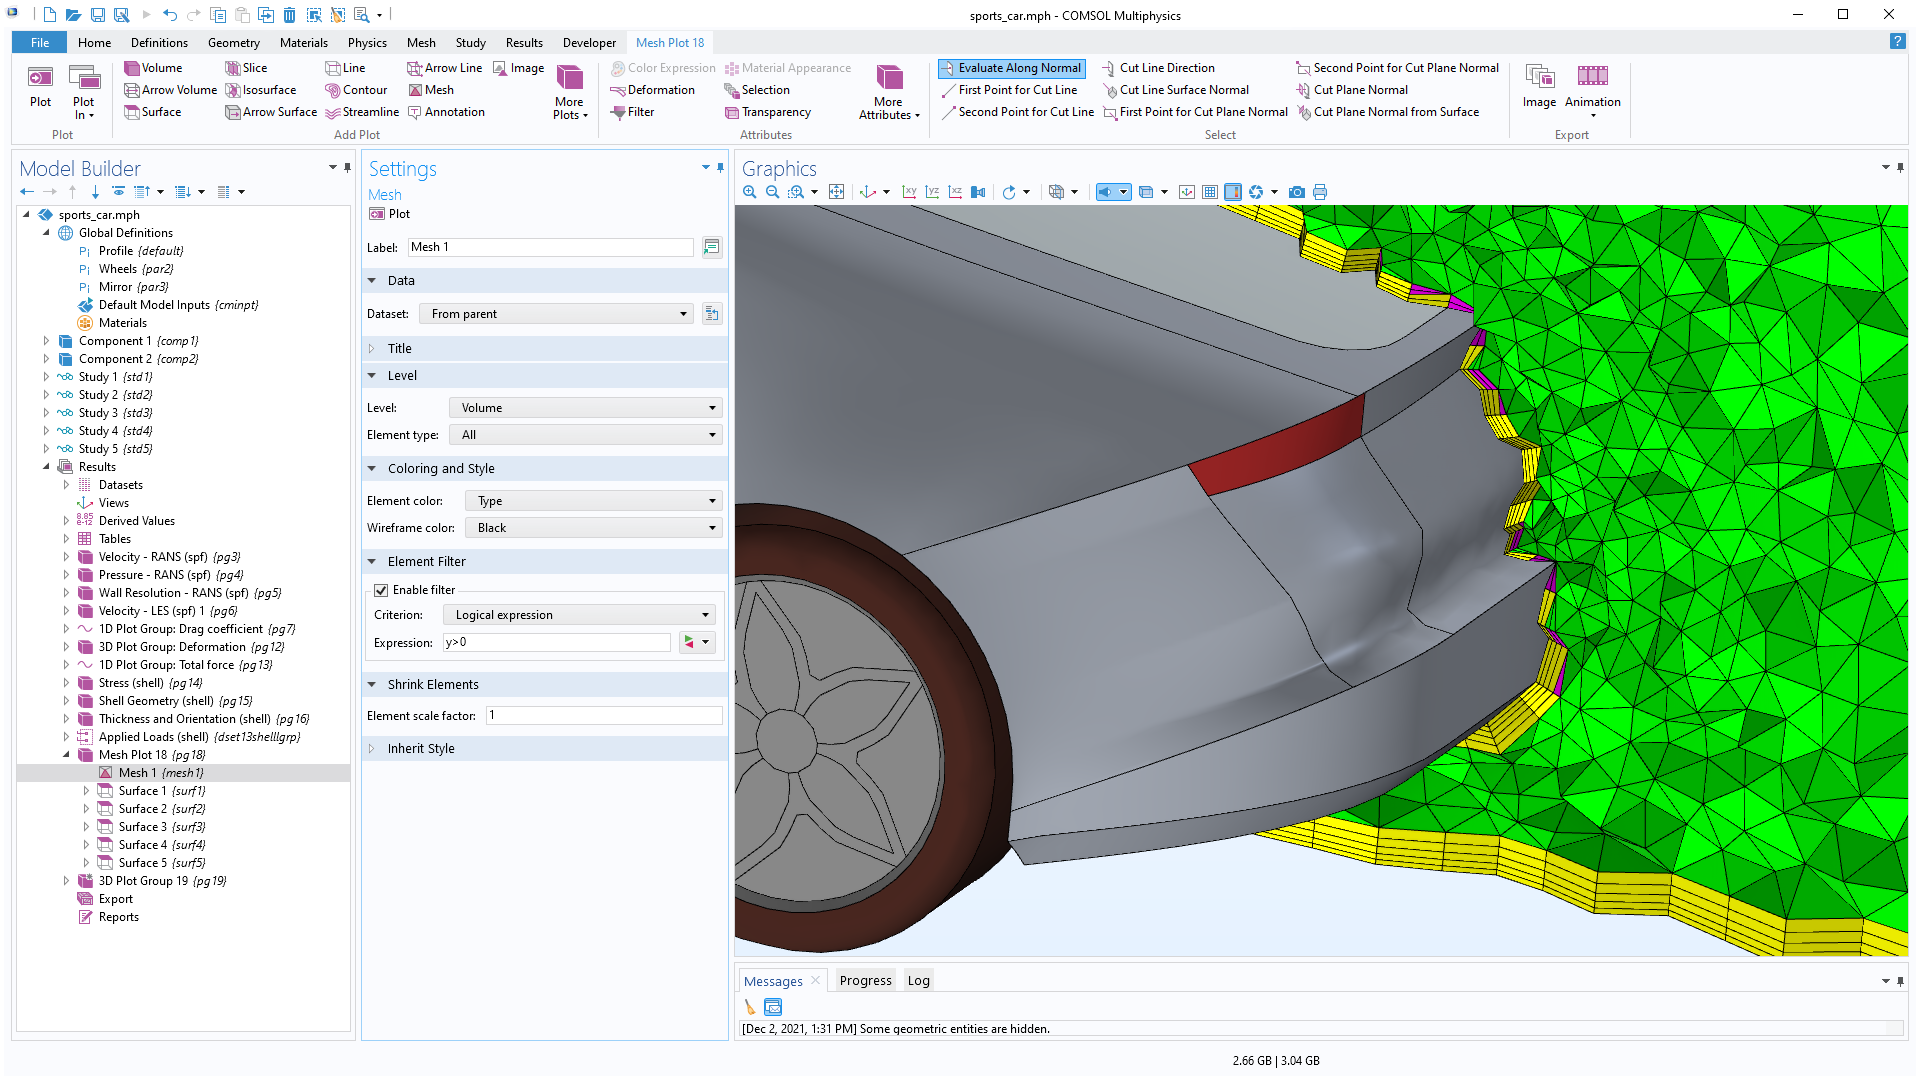 The COMSOL Multiphysics UI showing the Model Builder with the Mesh node selected, the corresponding Settings window, and a sports car model in the Graphics window.